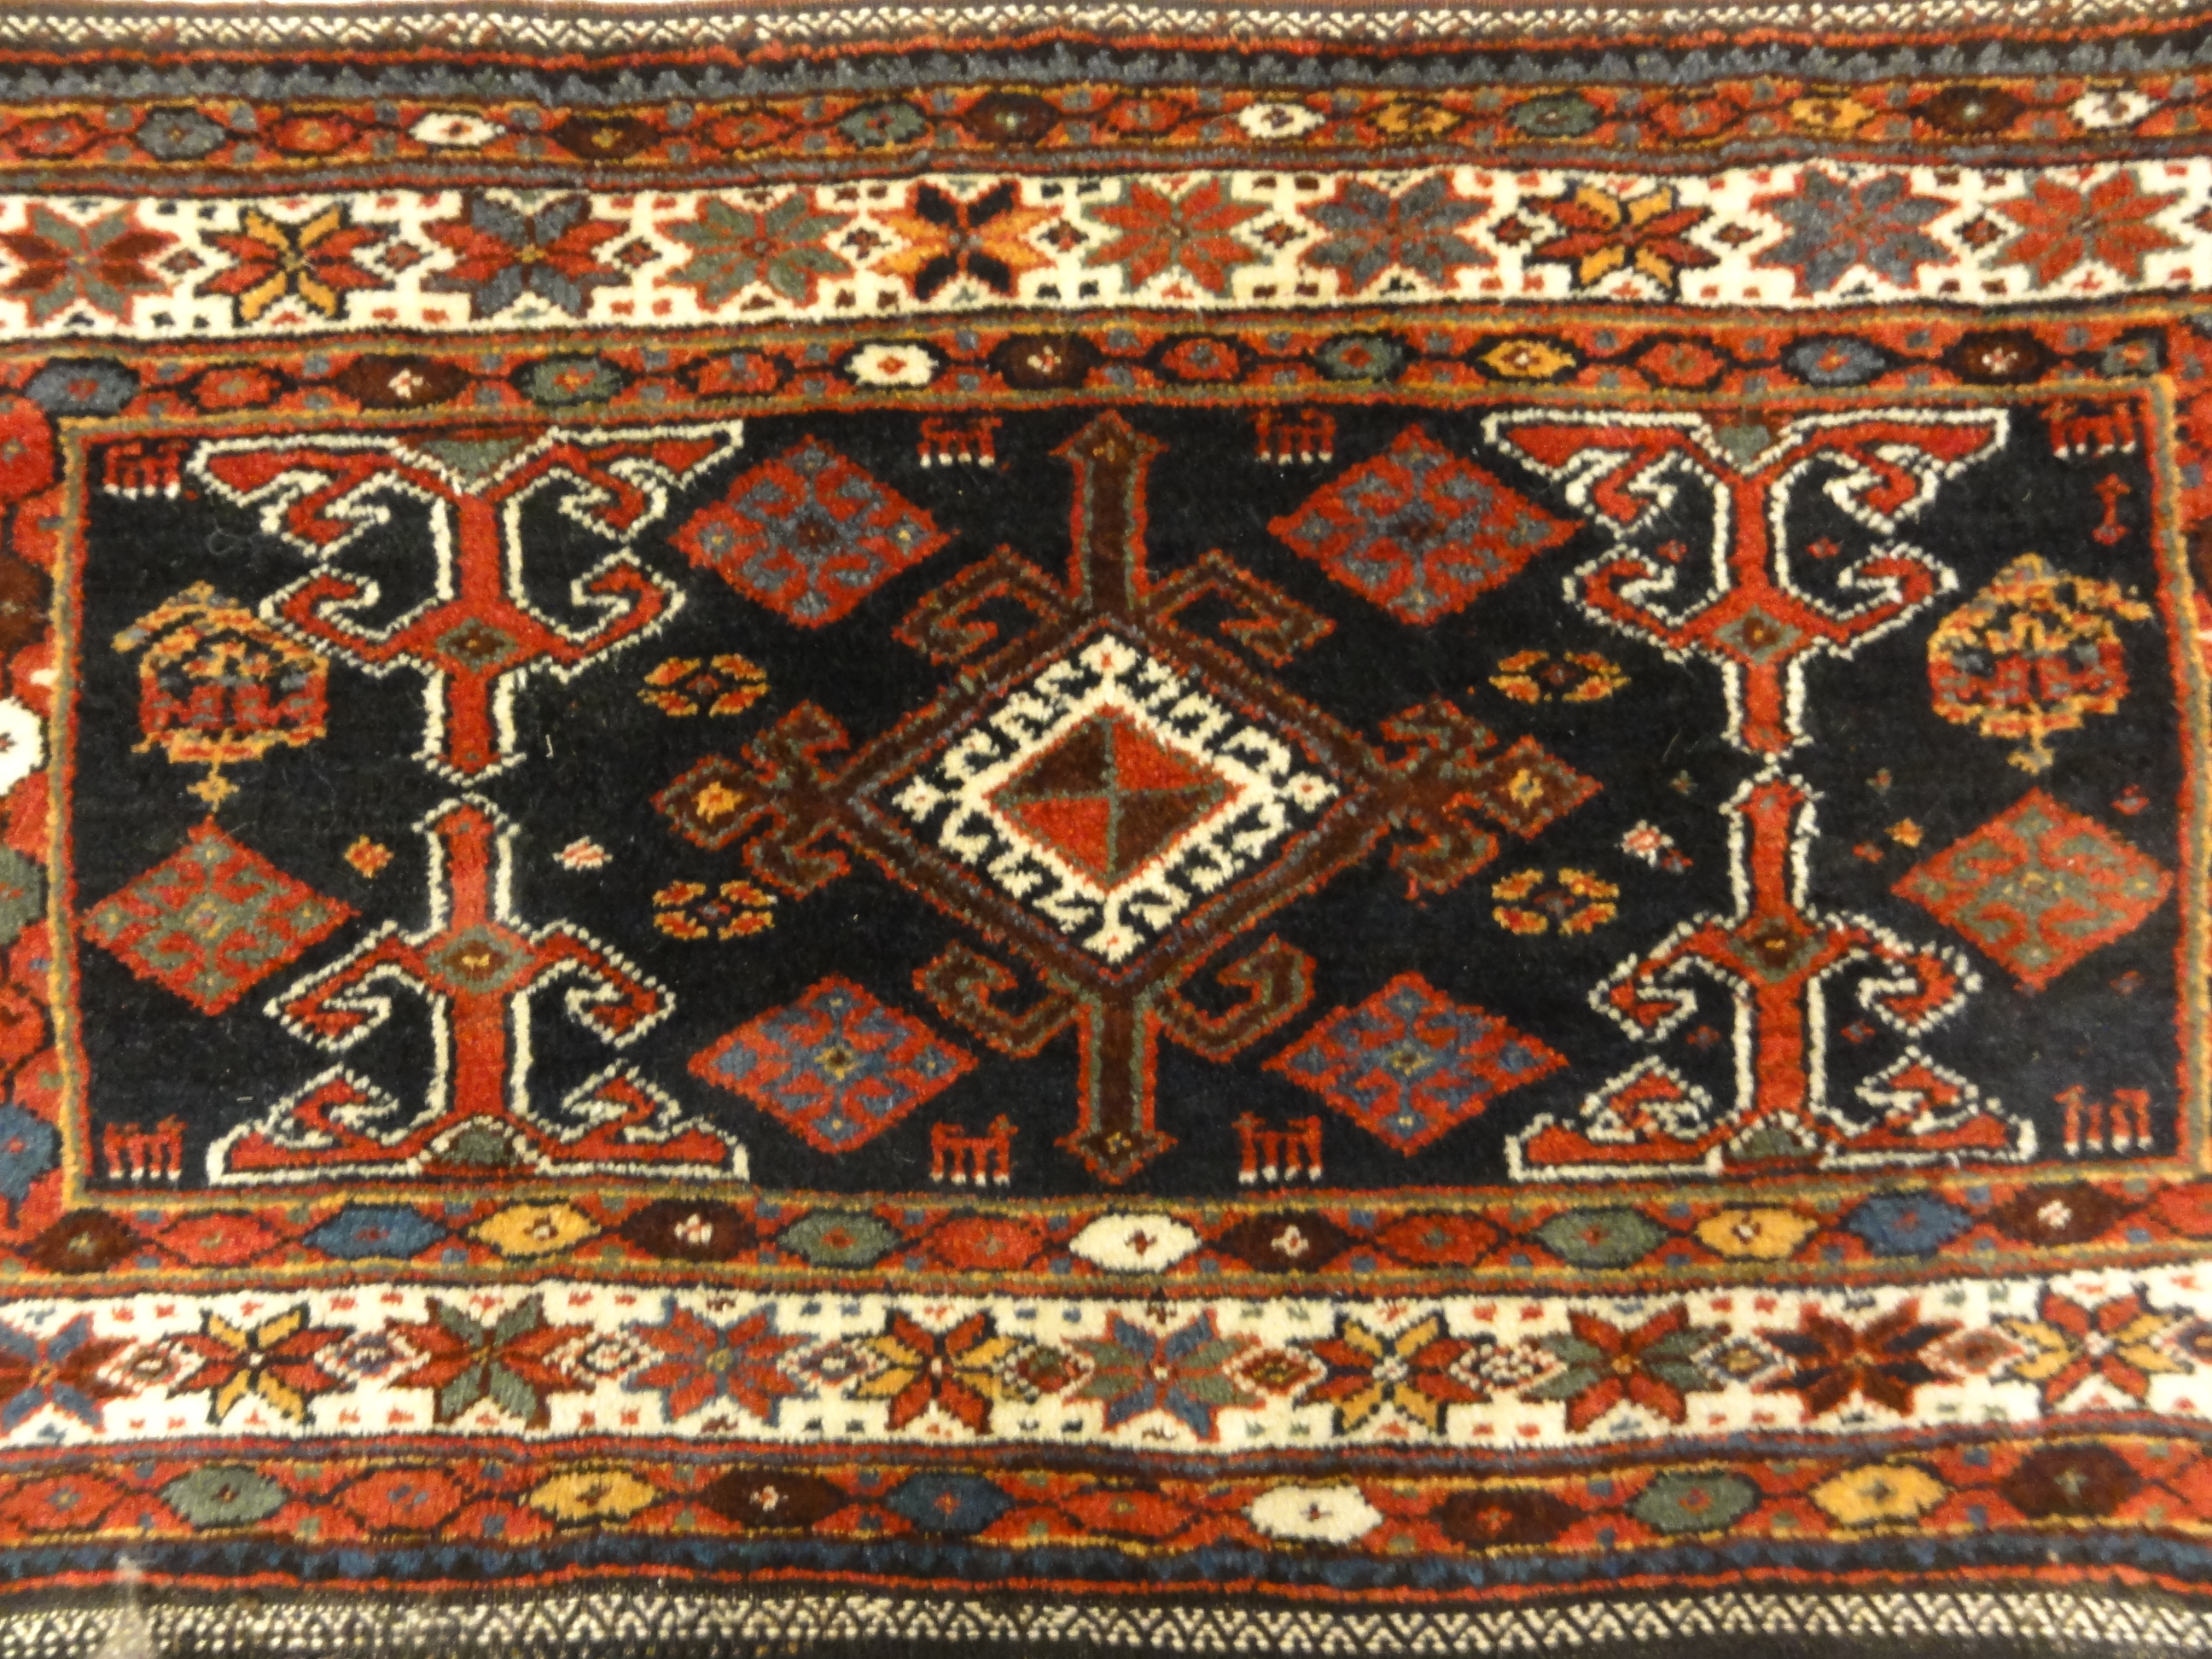 Kurdish Saddle Bag. A piece of genuine authentic antique woven carpet art sold by Santa Barbara Design Center, Rugs and More.